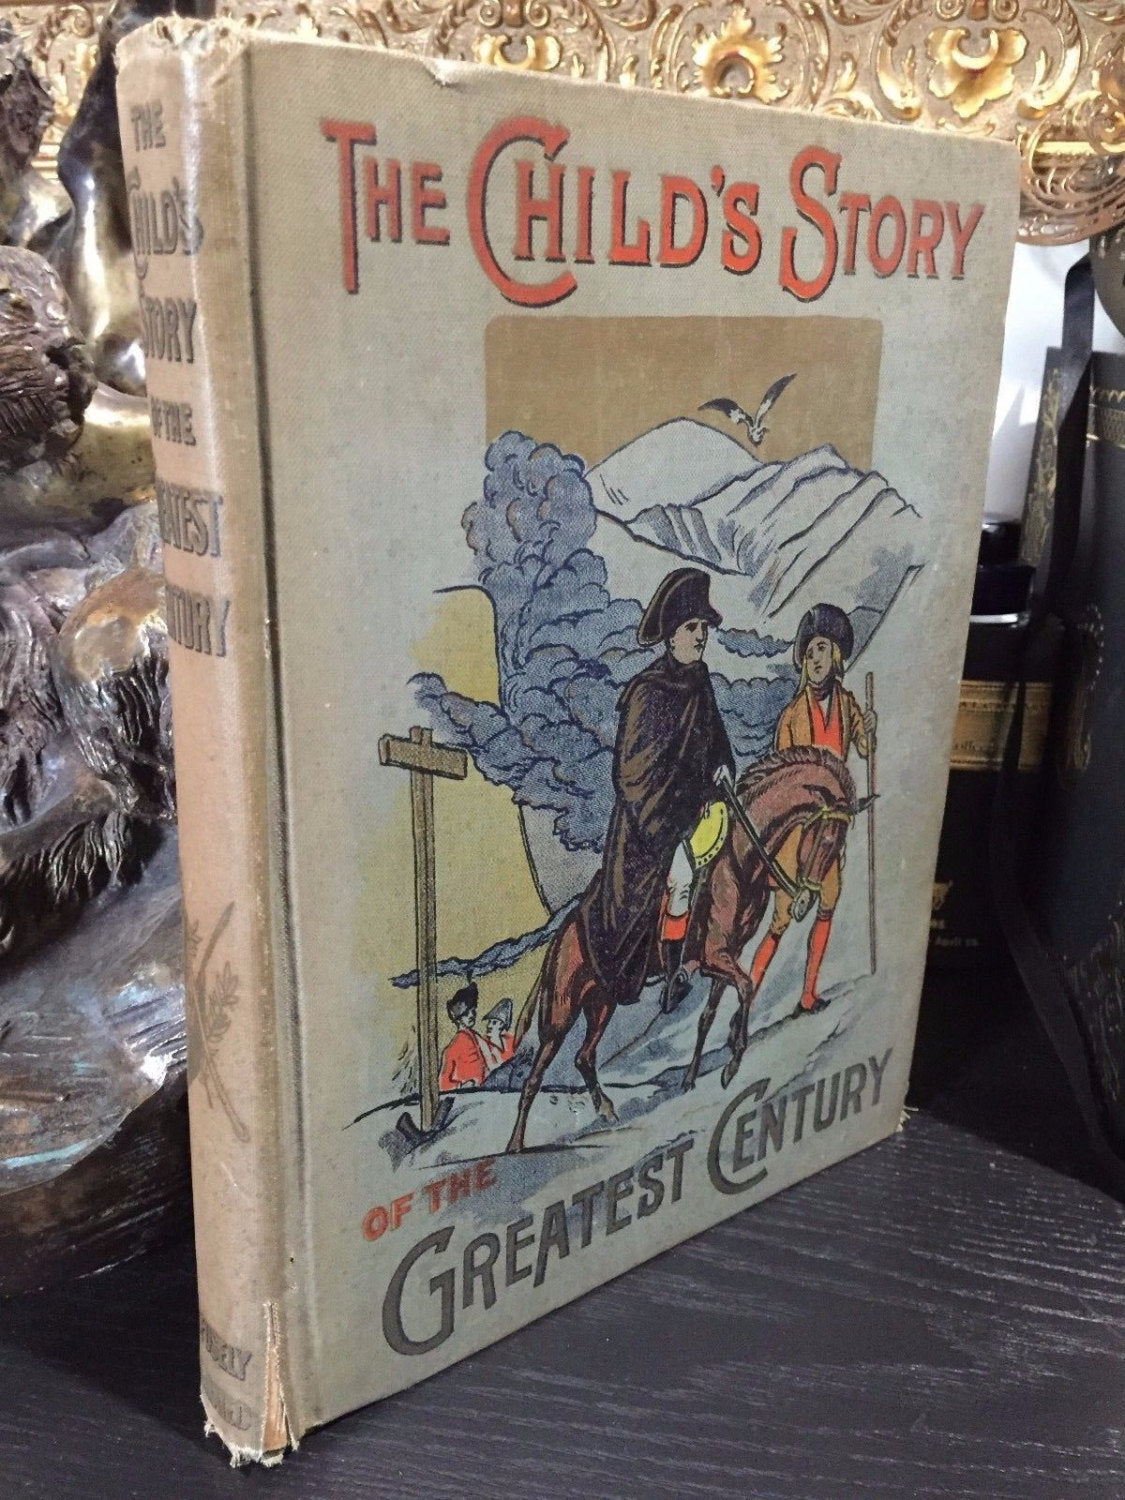 The Child's Story of the Greatest Century, Charles Morris, 1901, Illustrated